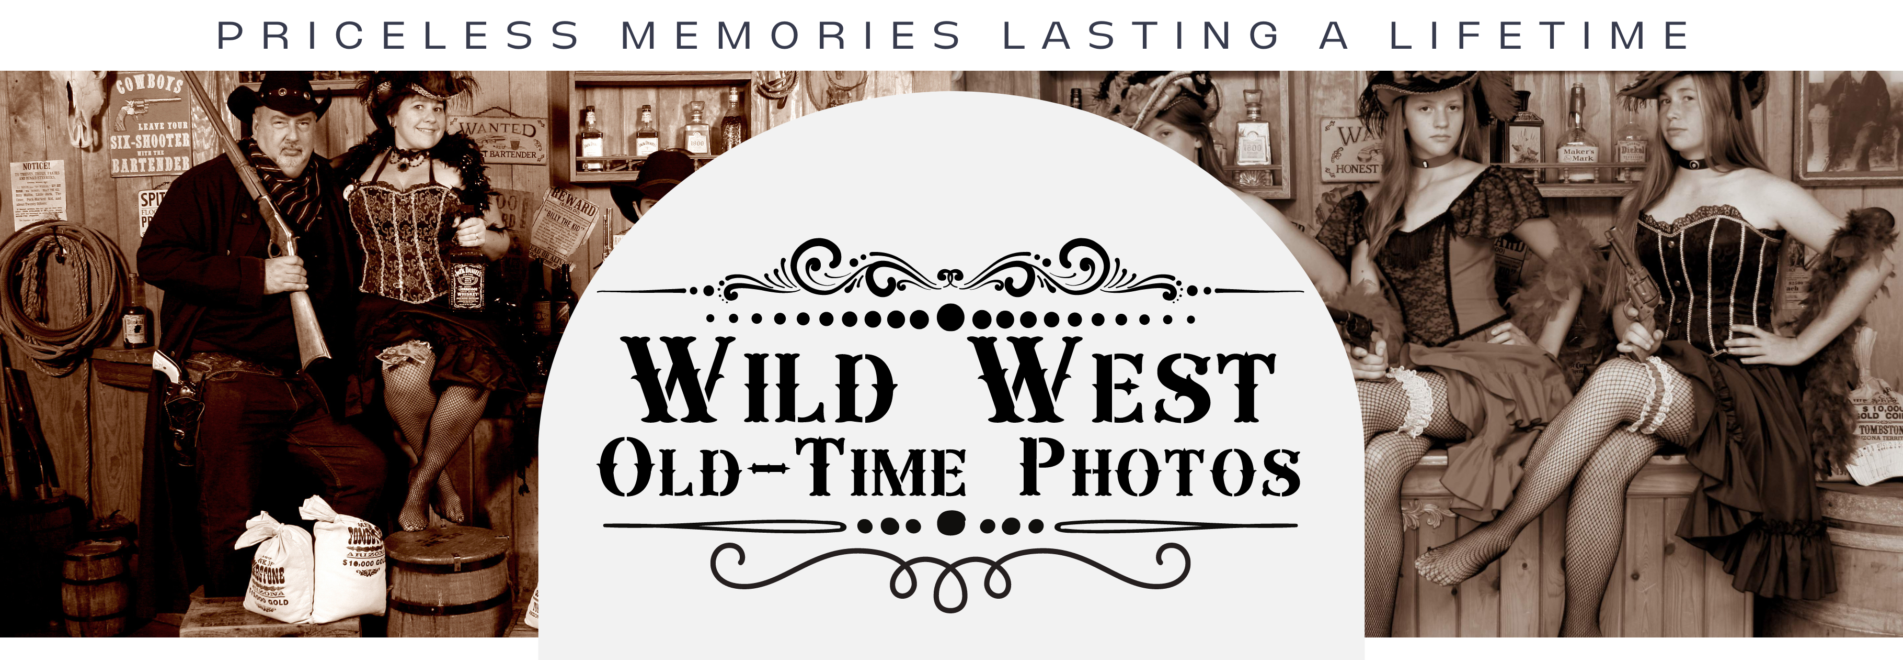 Wild Gals Old Time Photo - All You Need to Know BEFORE You Go (with Photos)